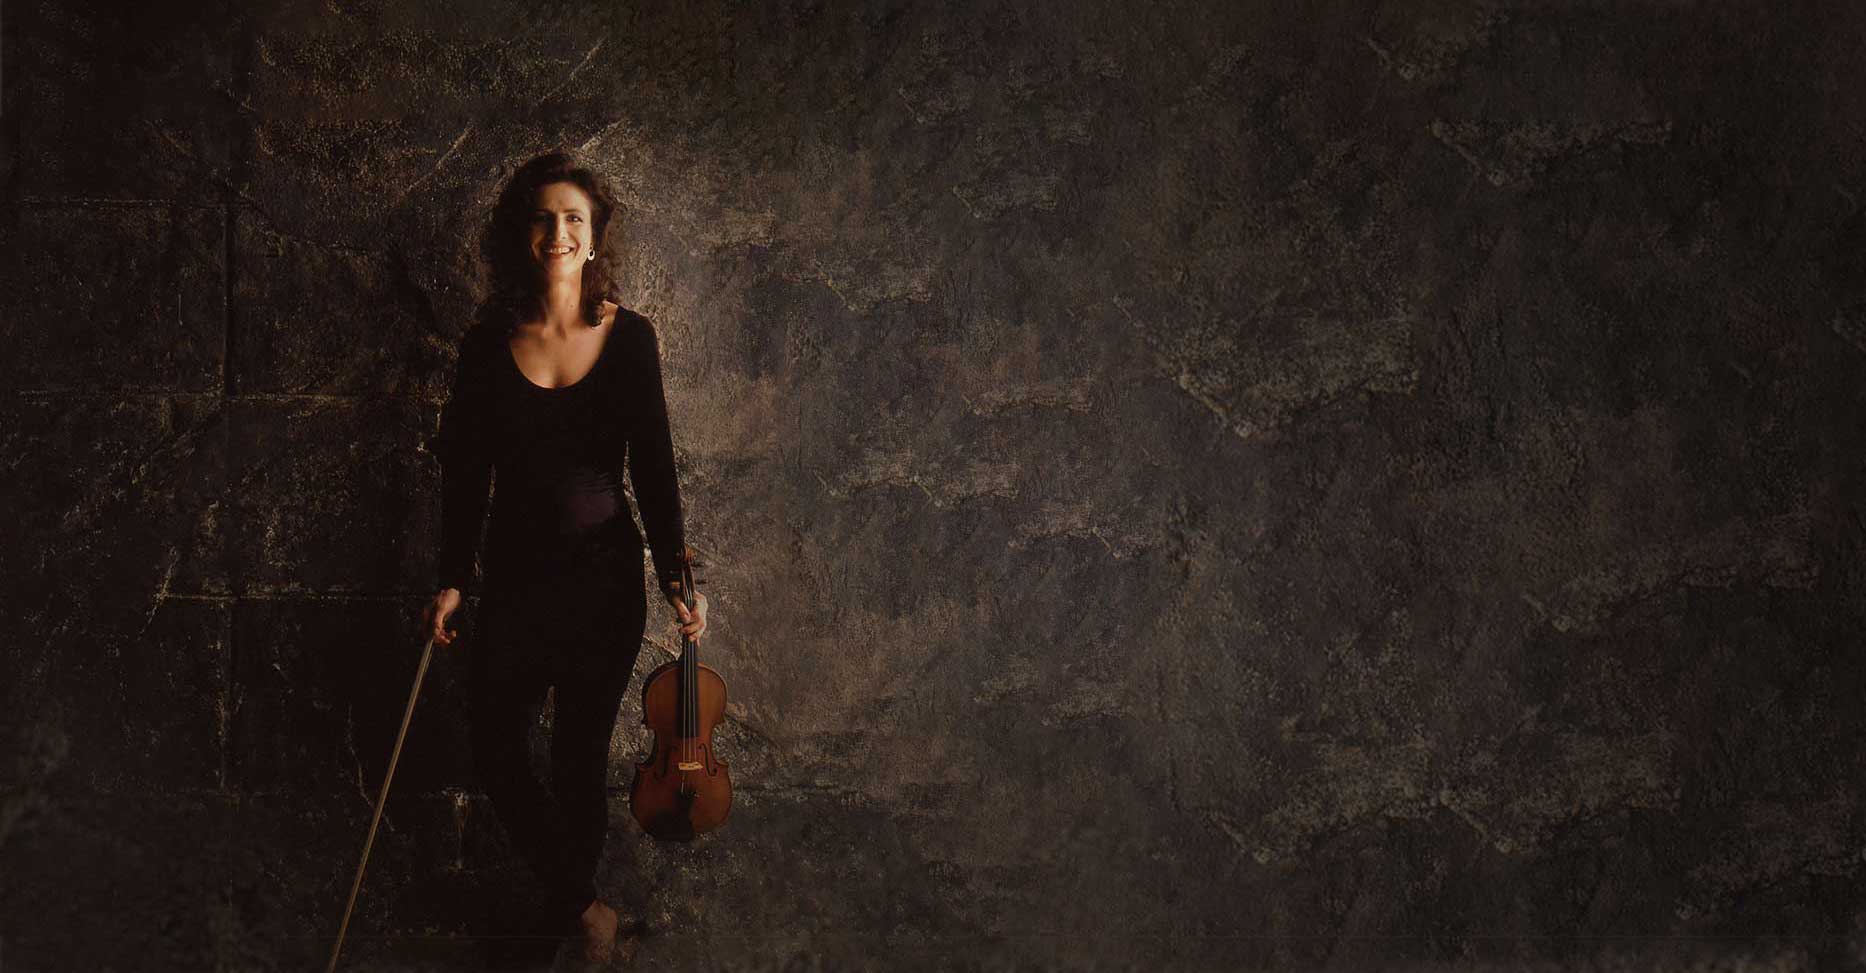 madeleine mitchell against a stone wall background and holding a violin